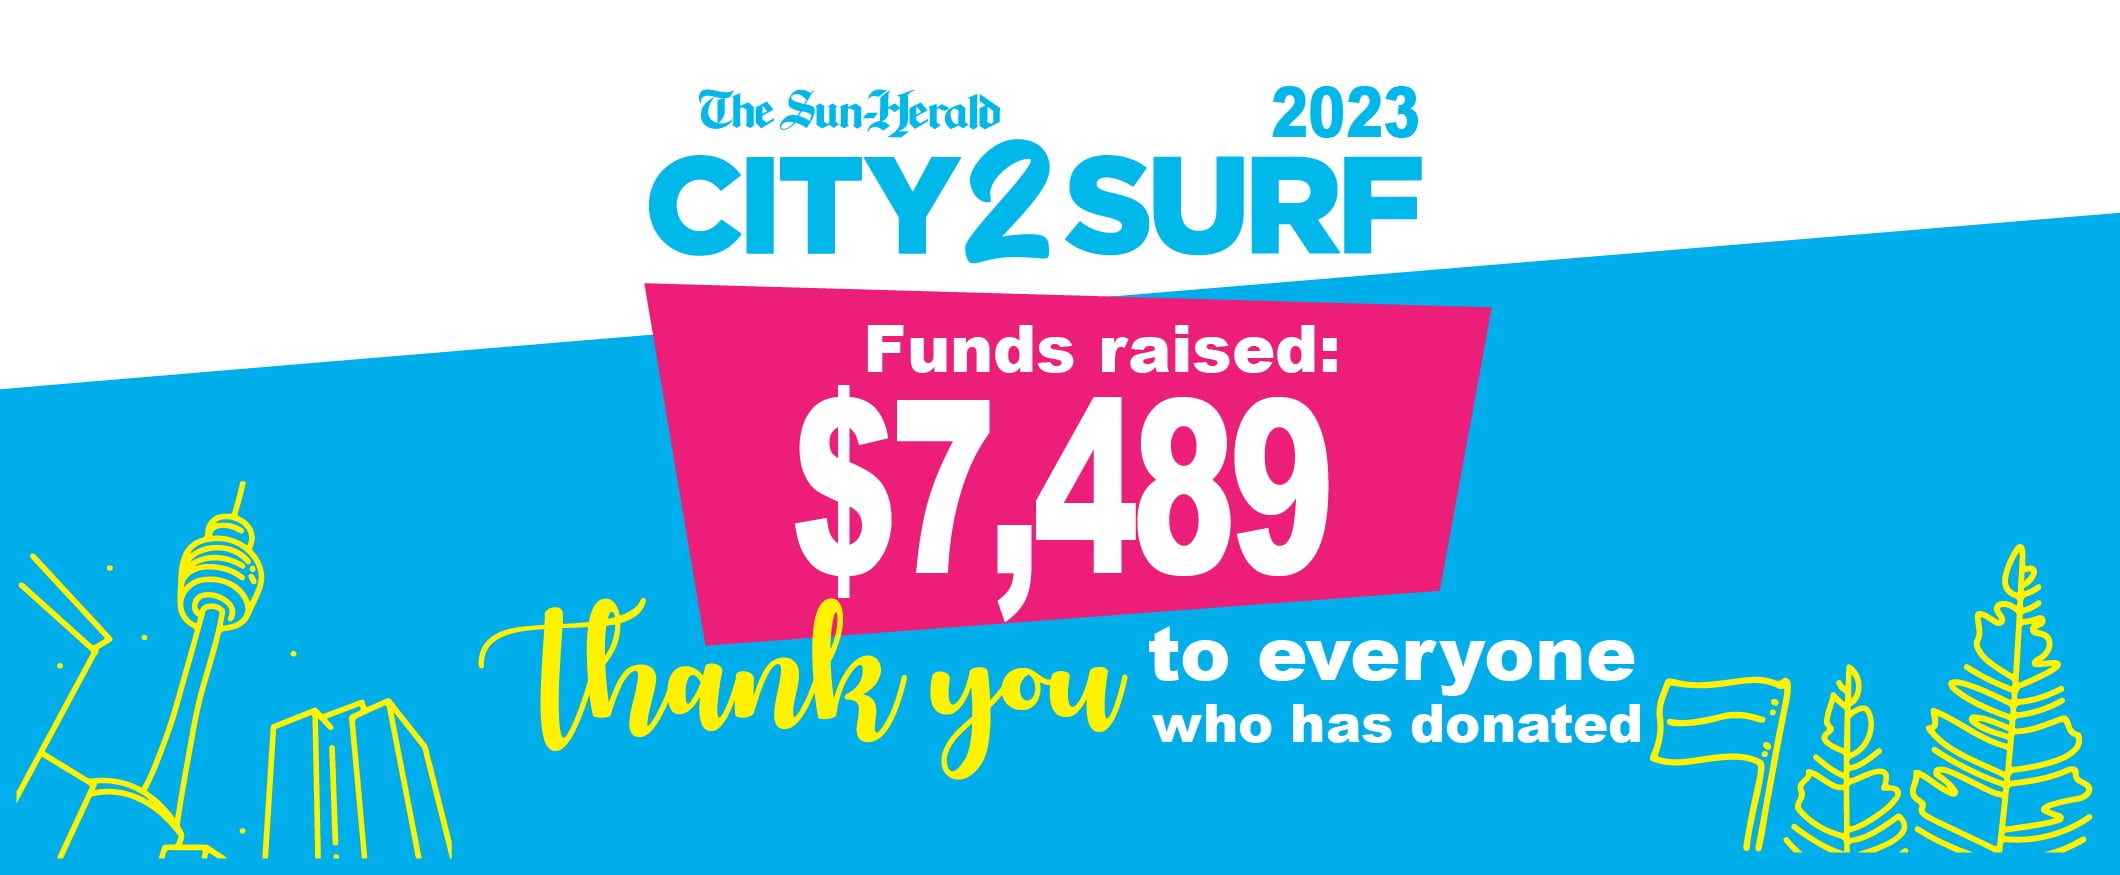 City 2 Surf Scroller 2023 Funds Raised